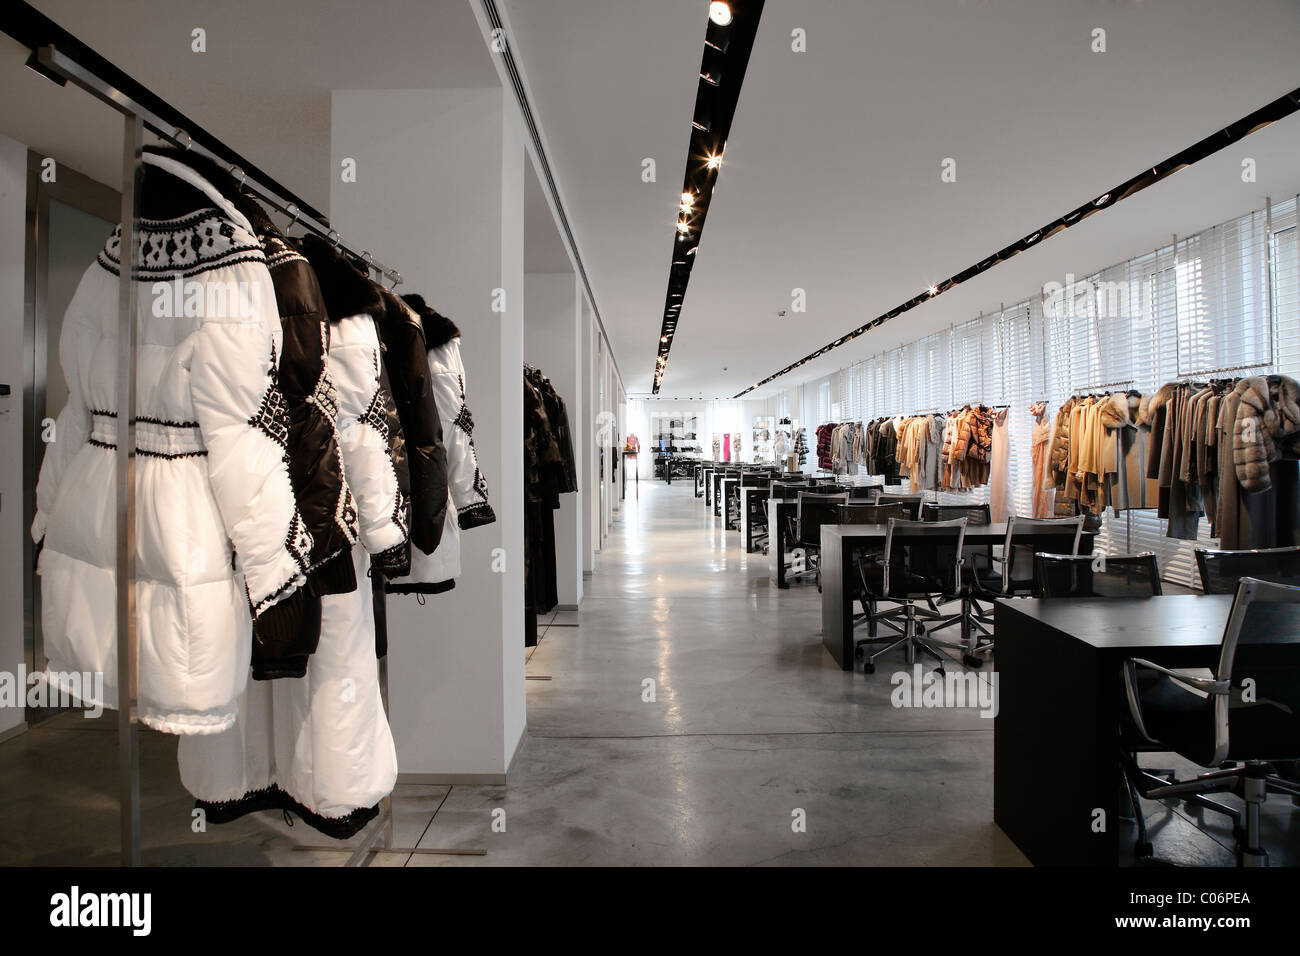 Fashion showroom in Milan, Italy Stock Photo, Royalty Free Image ...